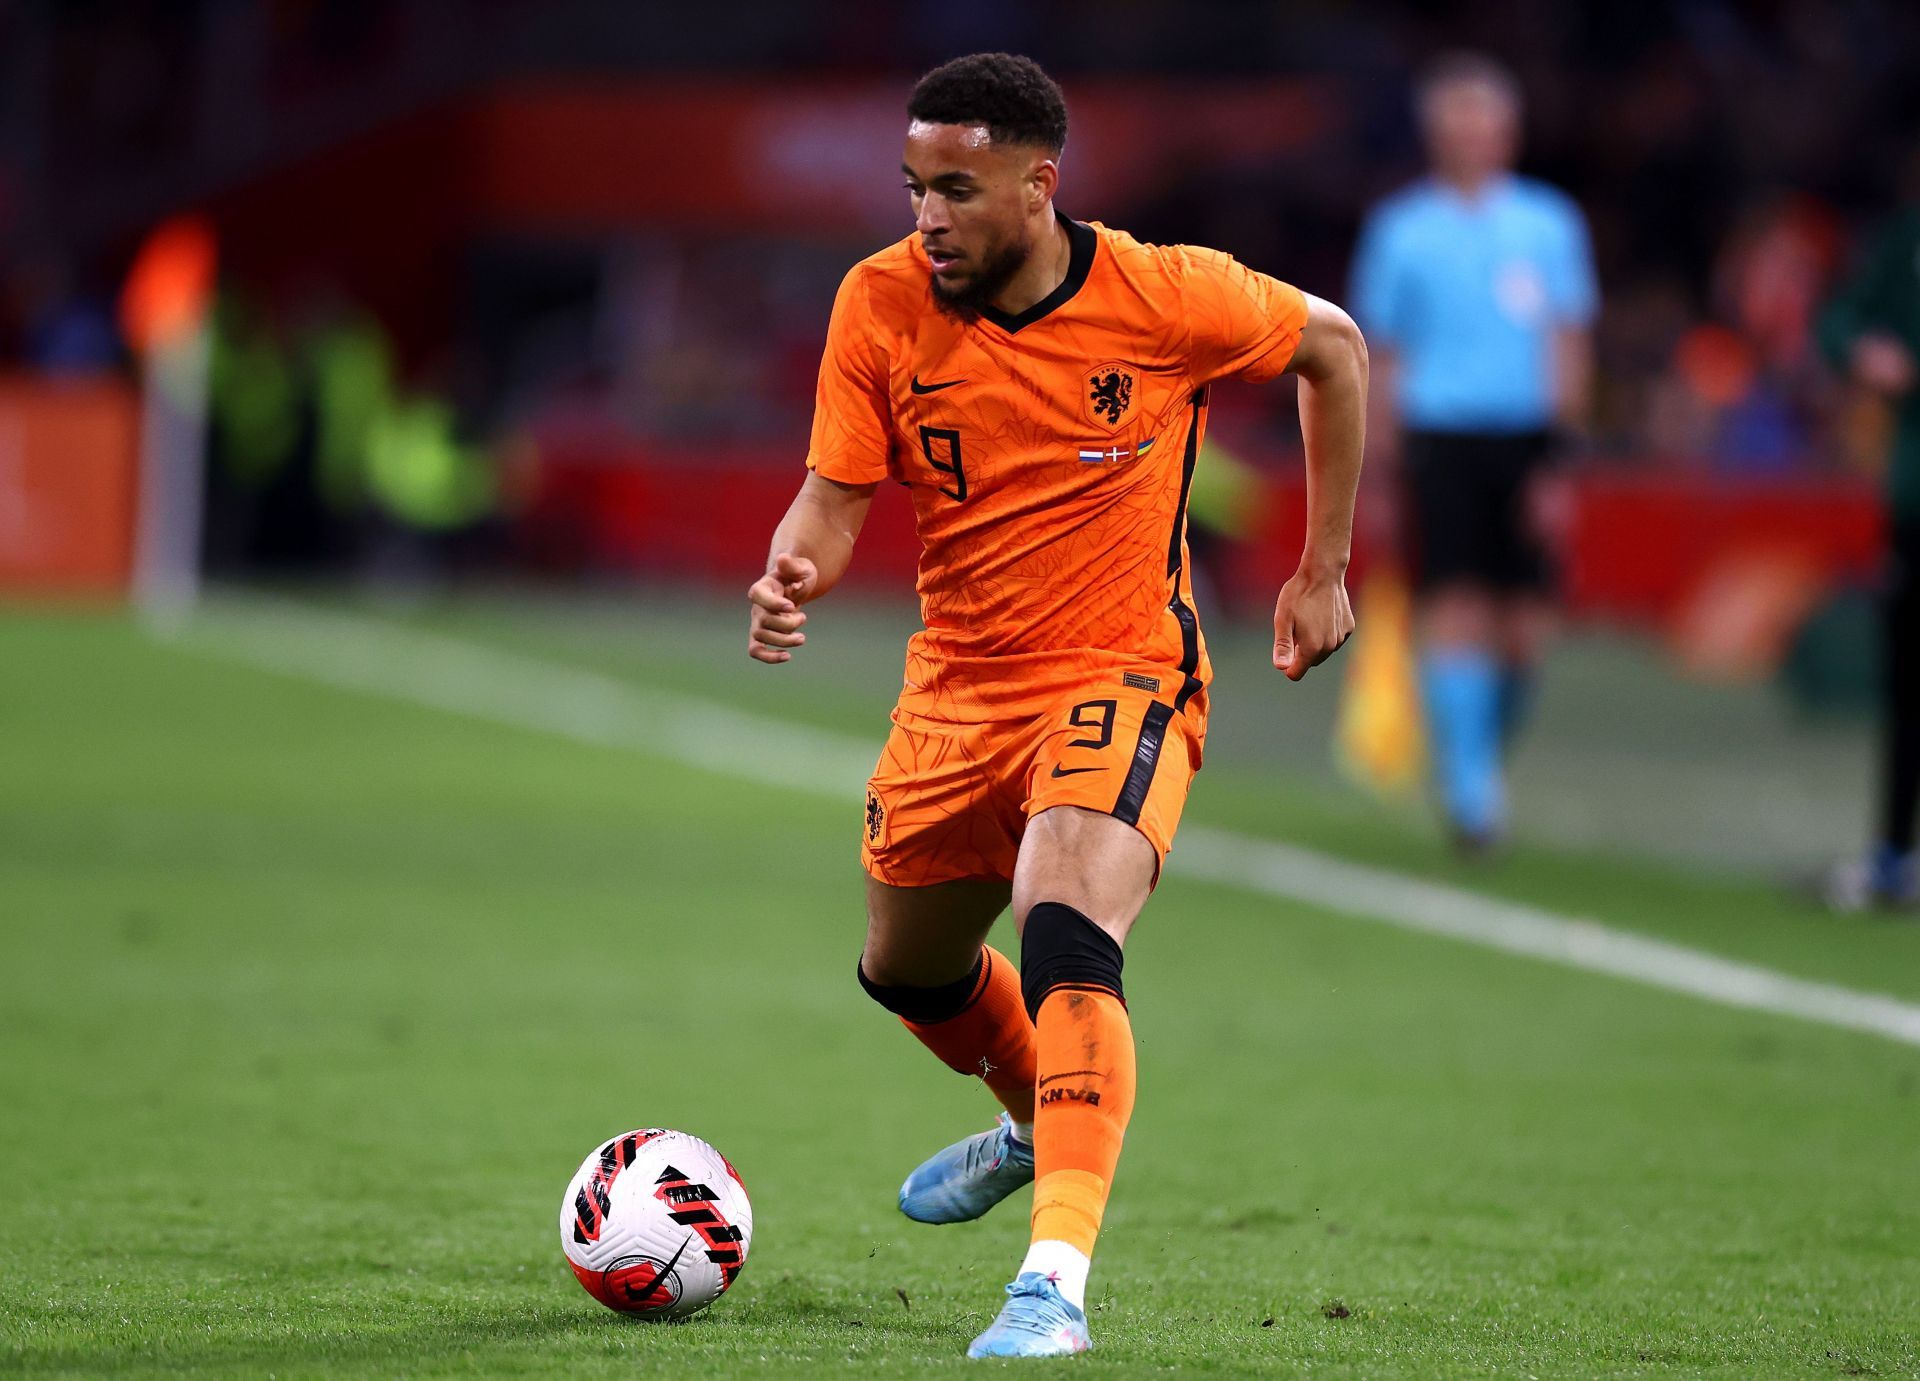 Arnaut Danjuma is one of the most talented youngsters in this Netherlands squad.